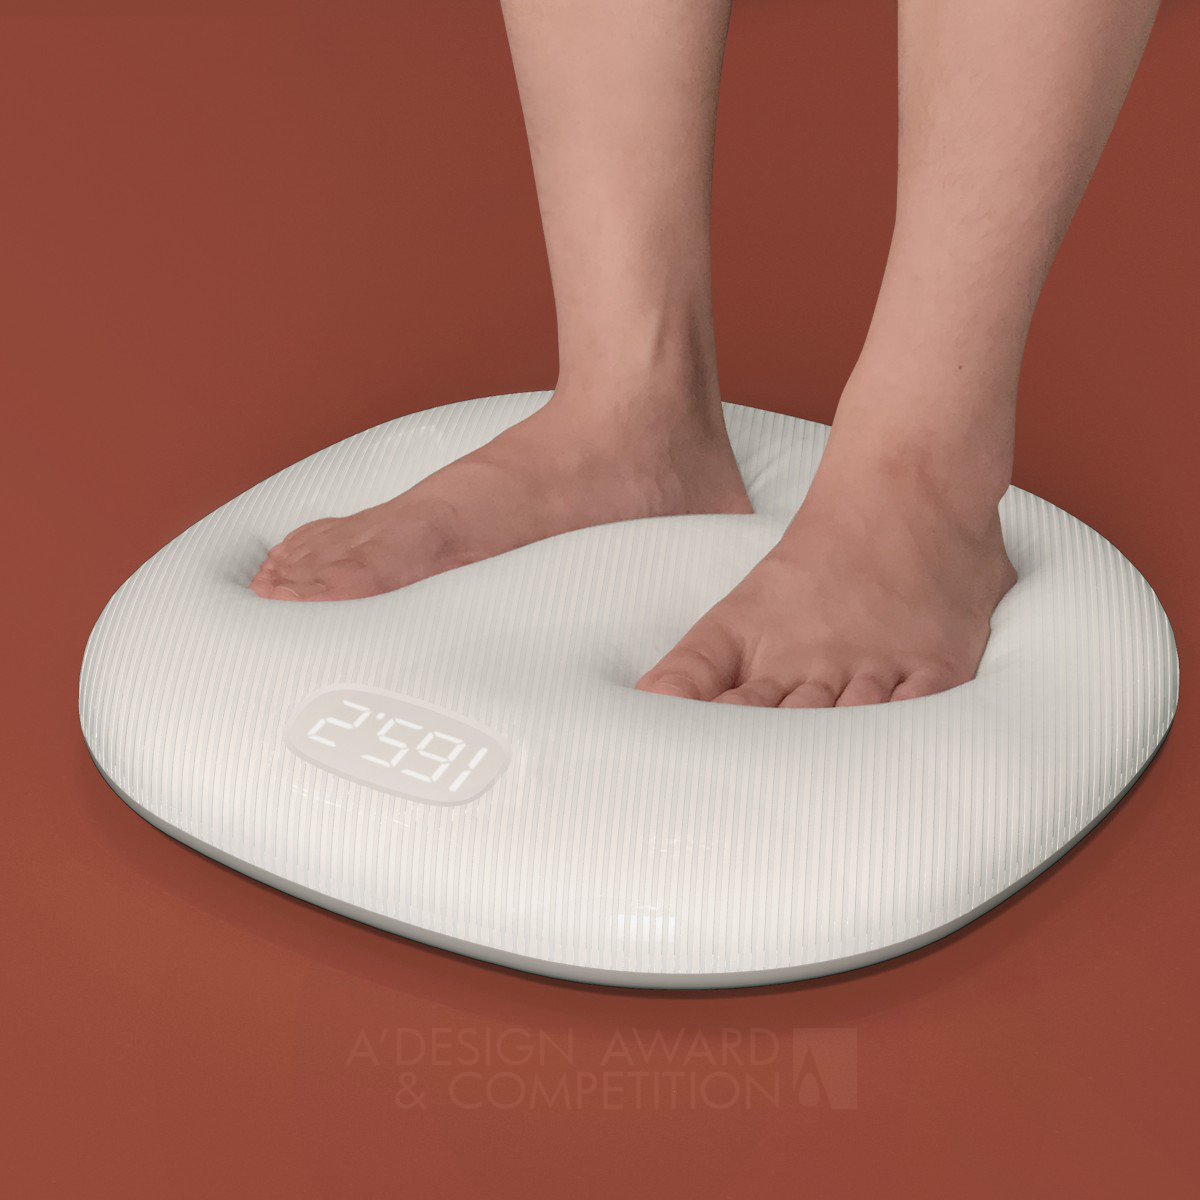  Weight Scale